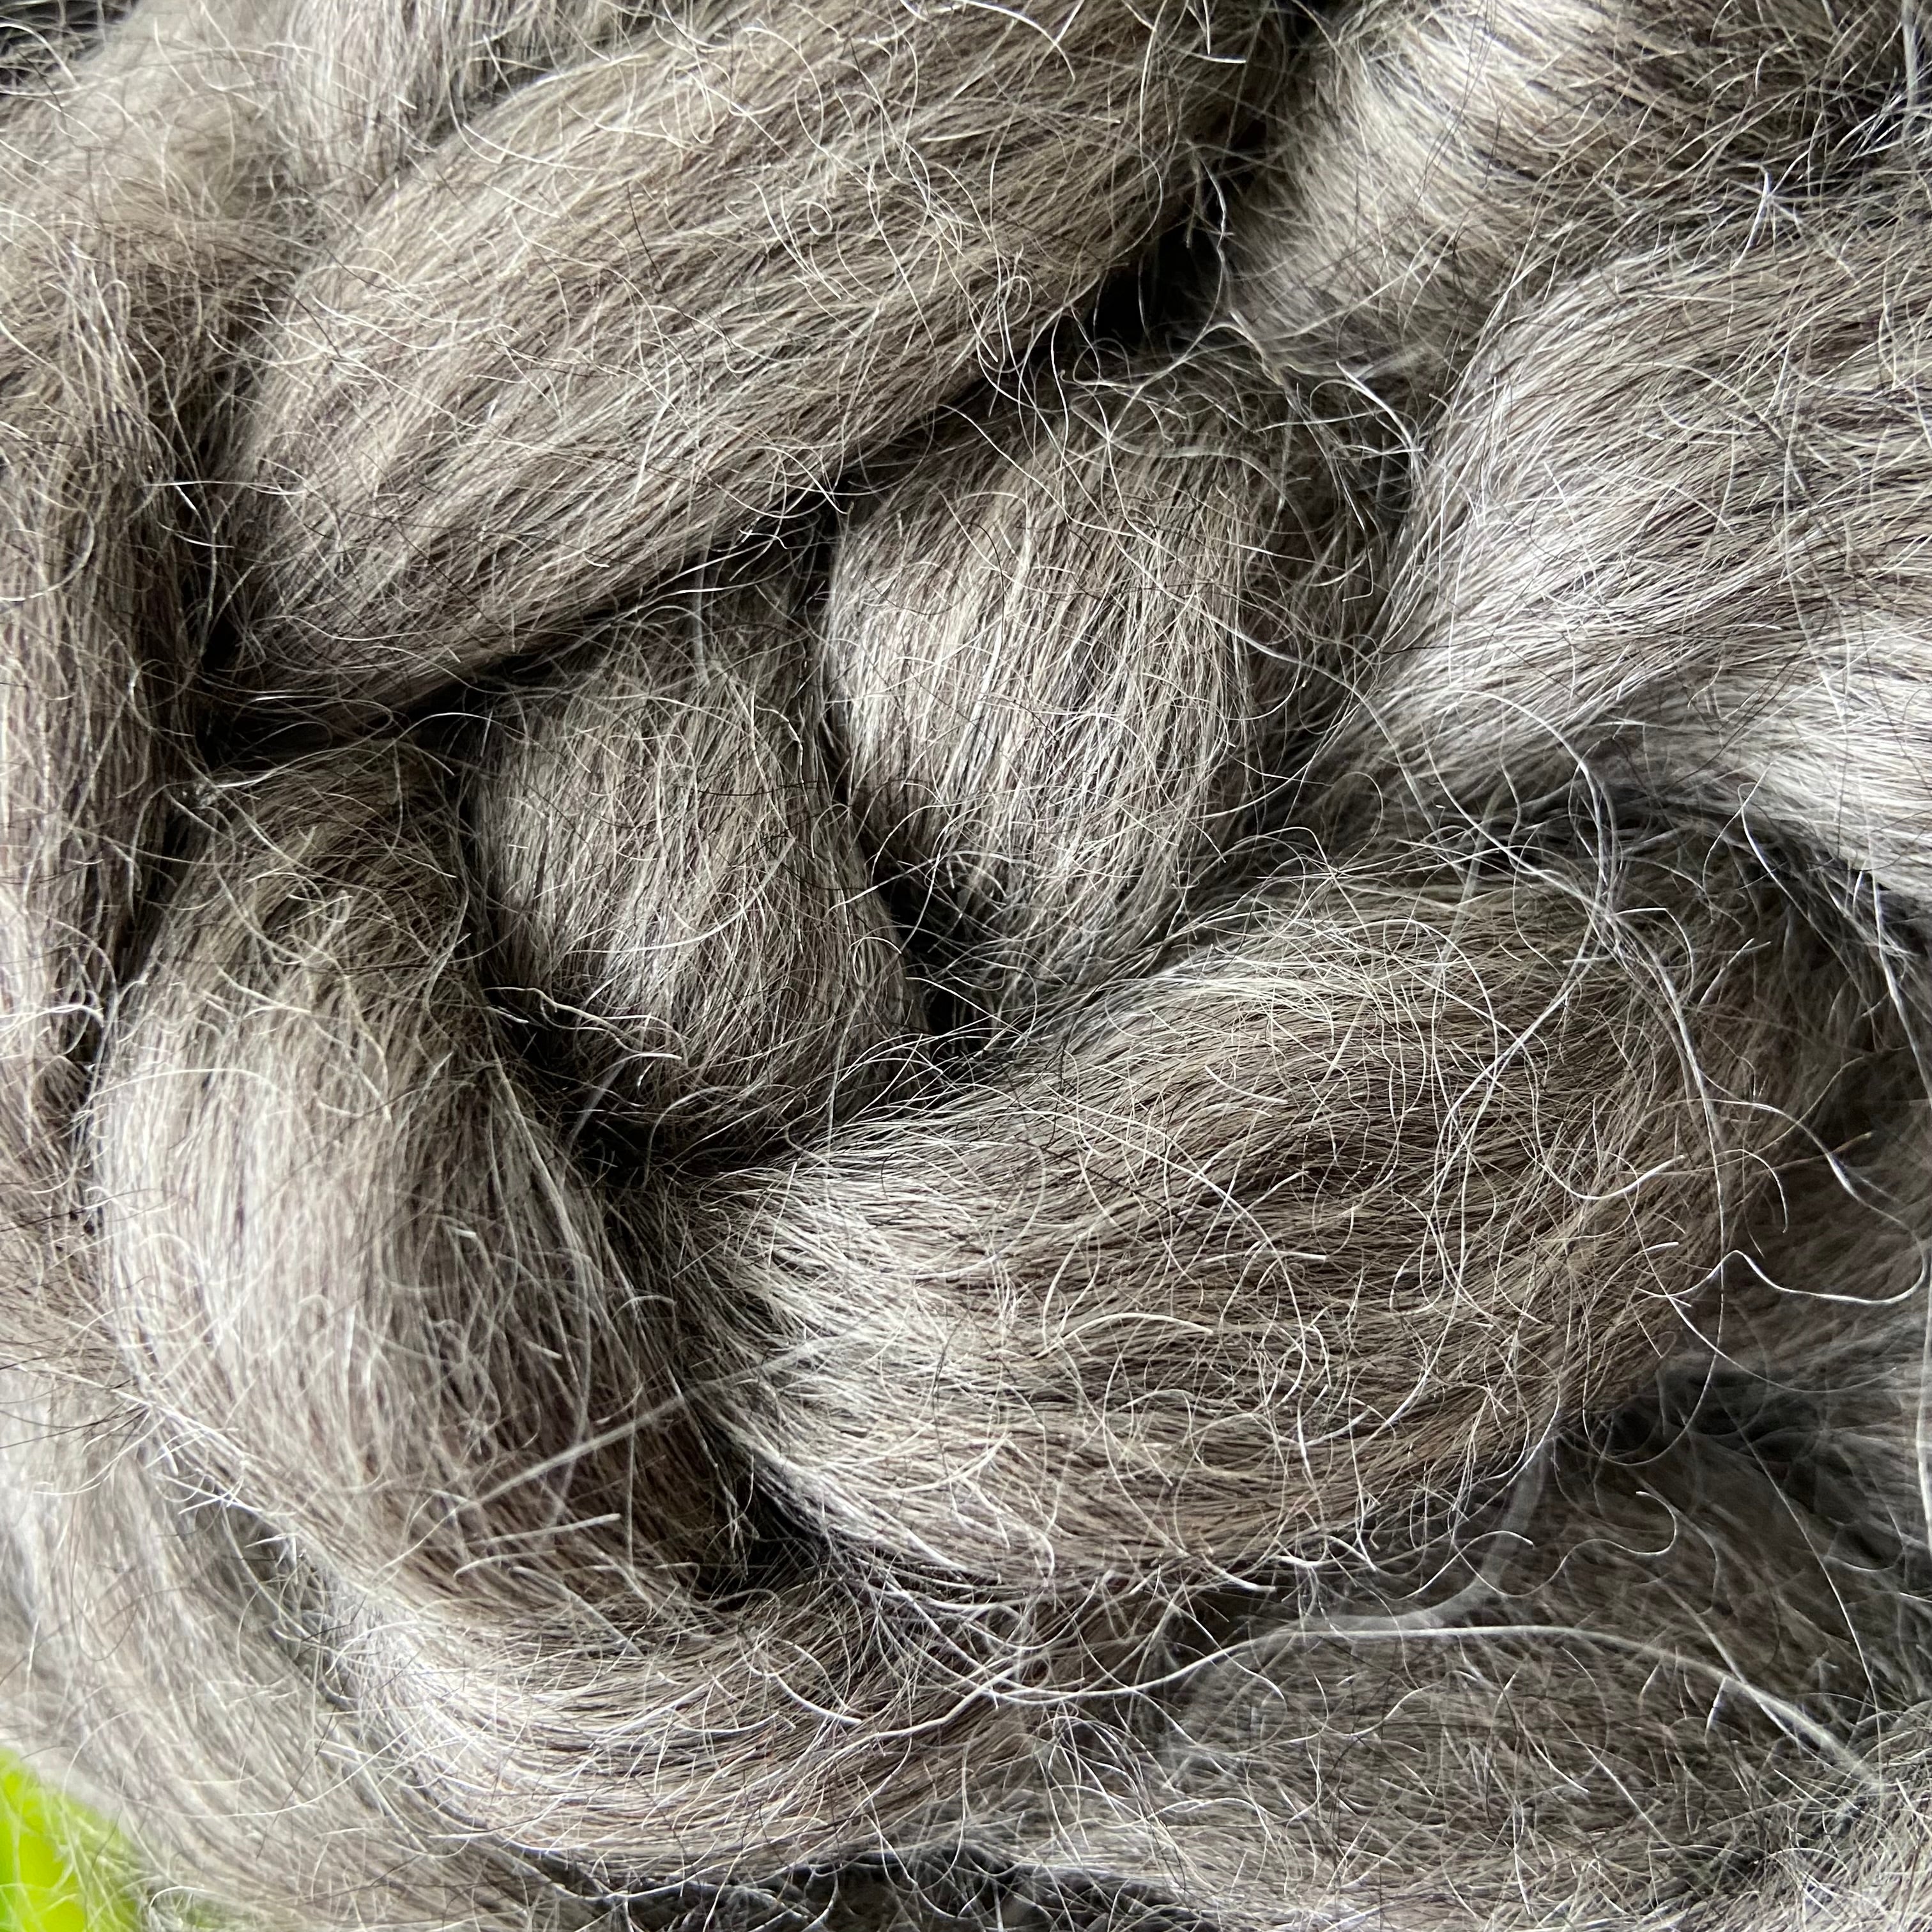 Nudie - Undyed Grey Gotland - 100g Top in a Spinners Braid